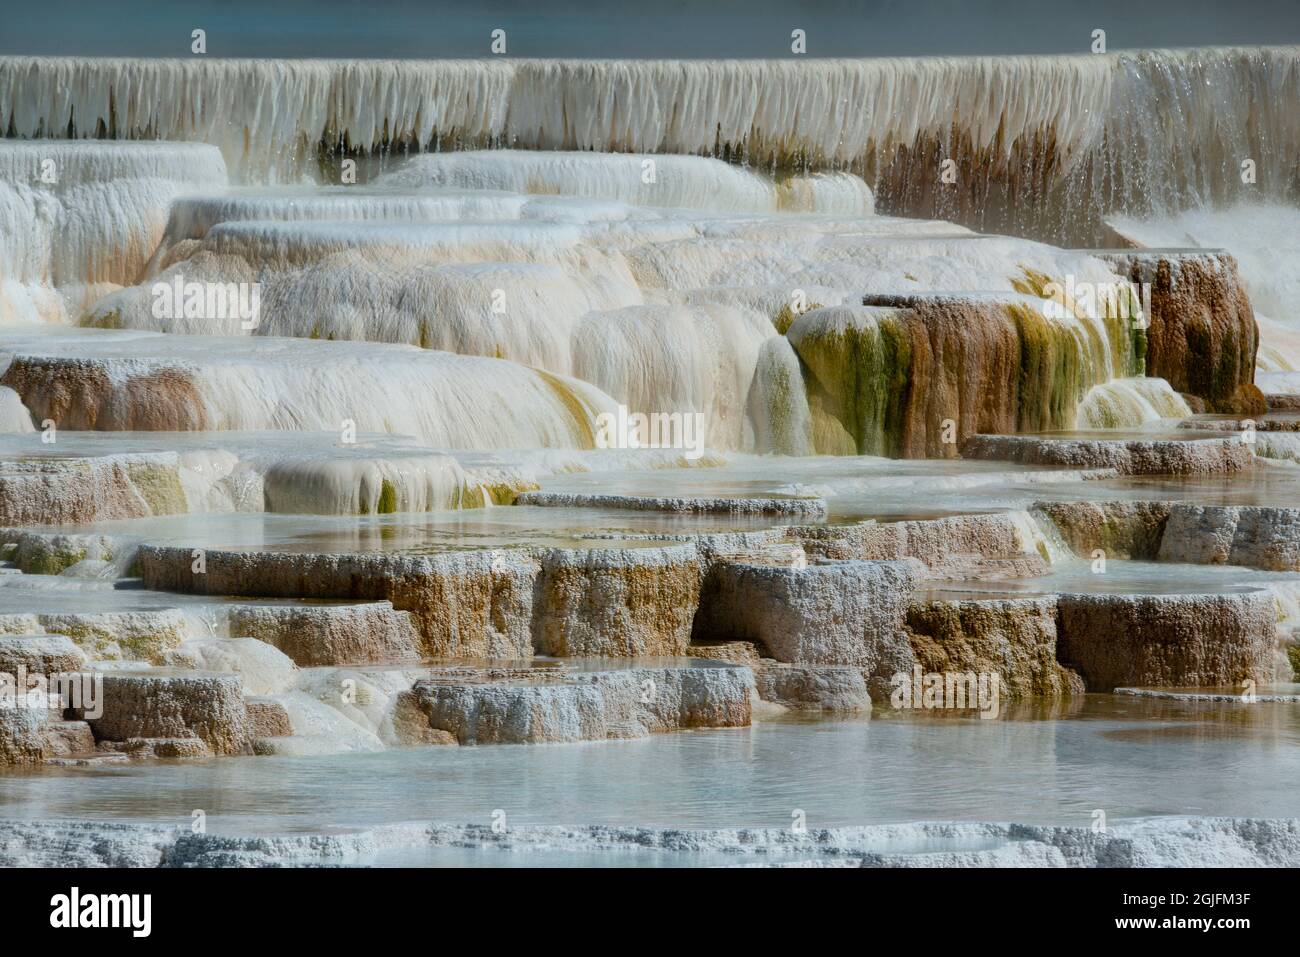 USA, Wyoming. Mineral deposit formations, Mammoth Hot Springs, Yellowstone National Park. Stock Photo